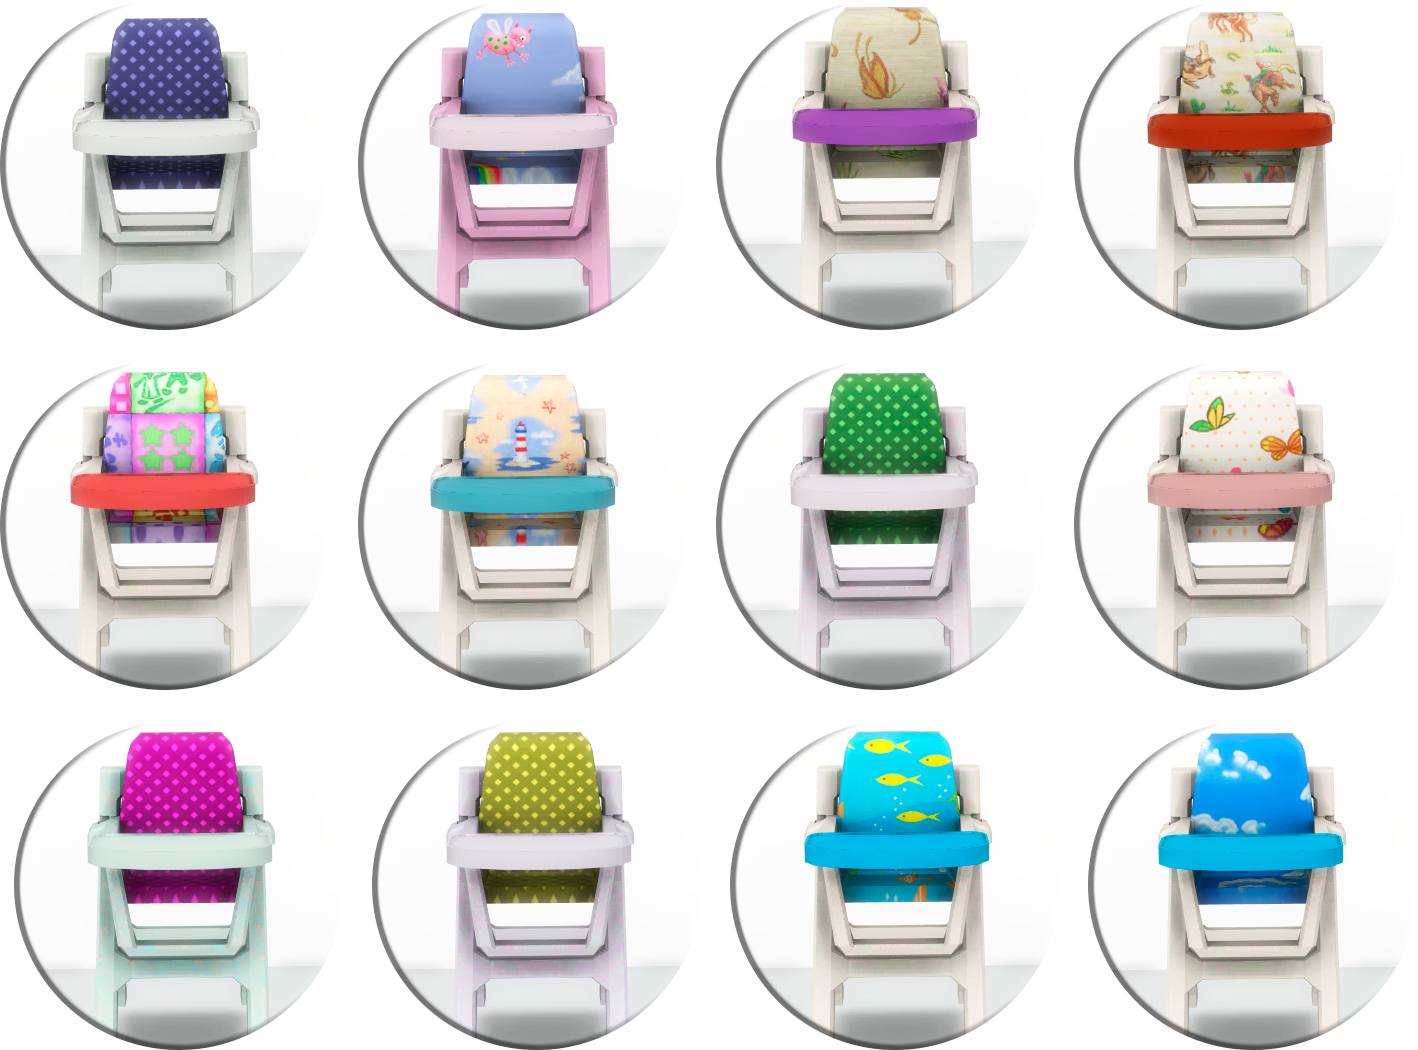 Sims Chairs Appliance High Seats Small Technology PNG Image